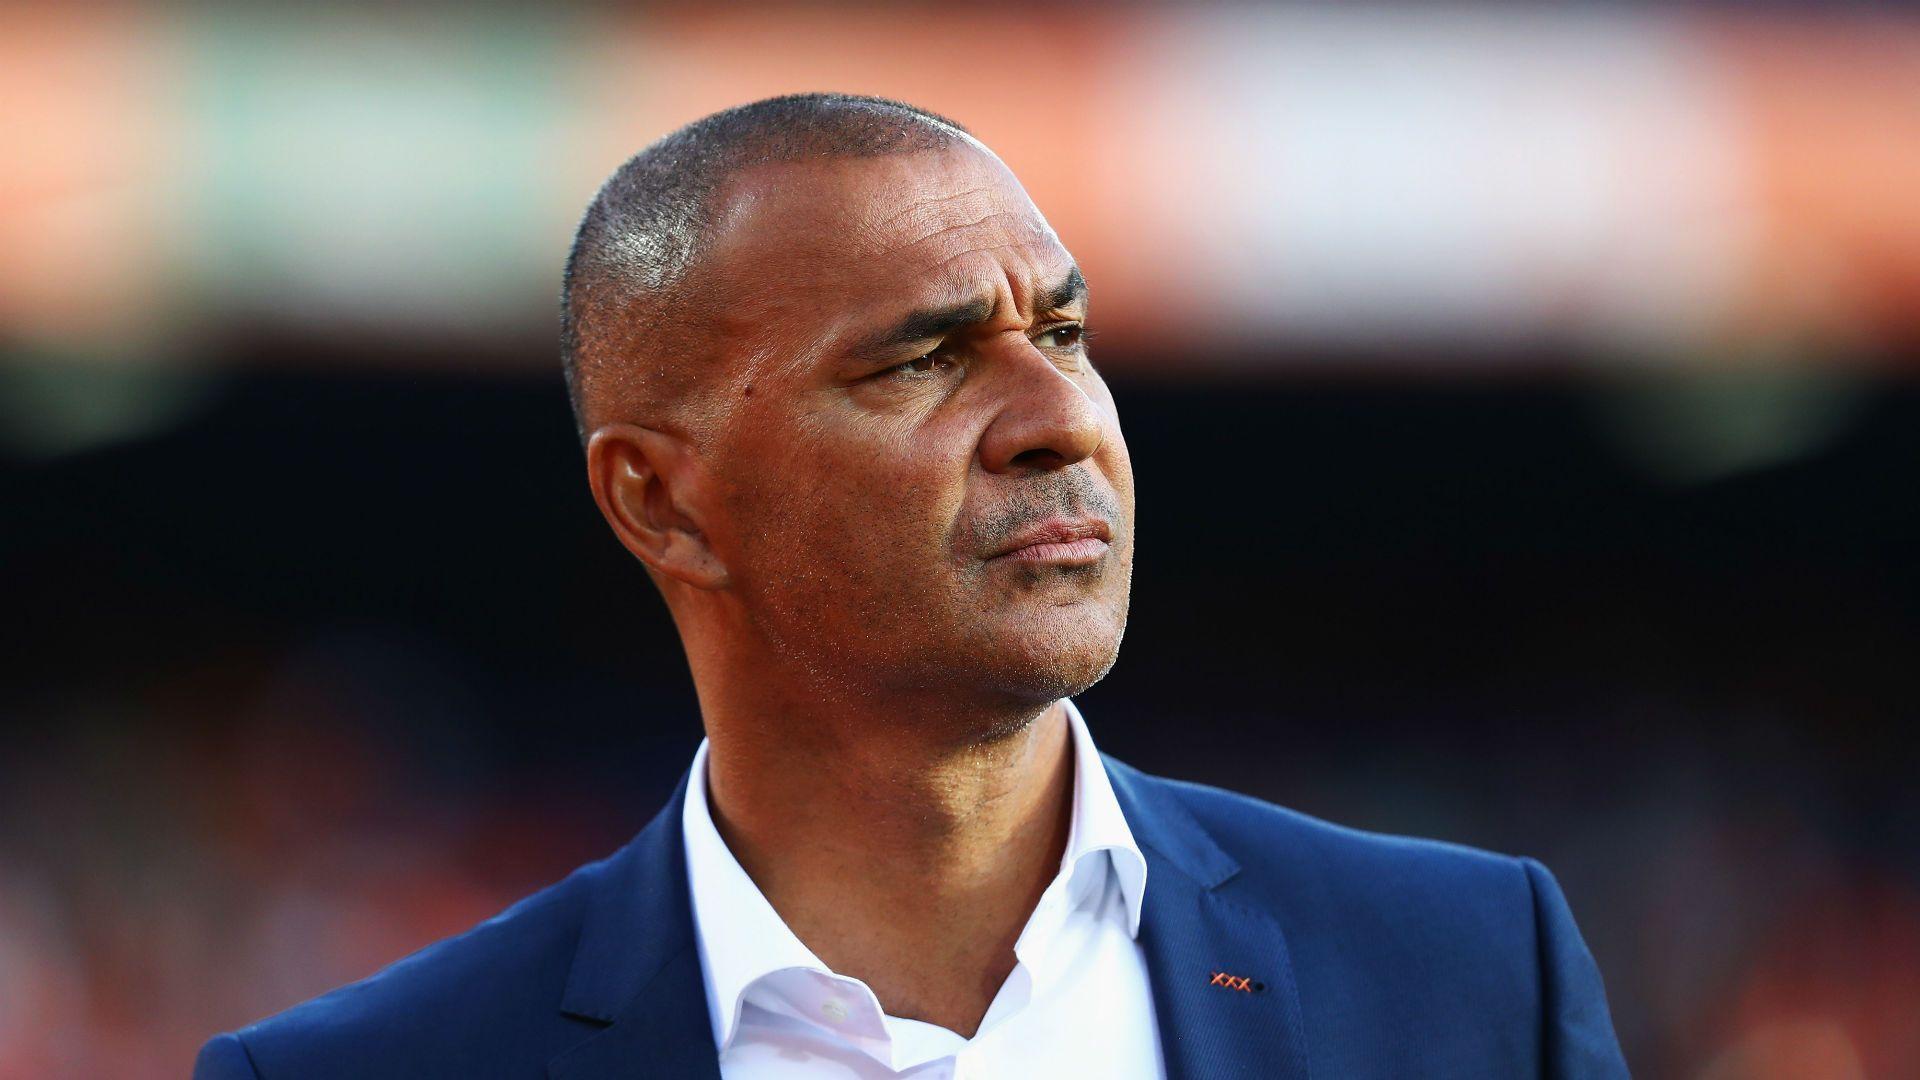 Ruud Gullit draws Advocaat ire after posting video from Netherlands